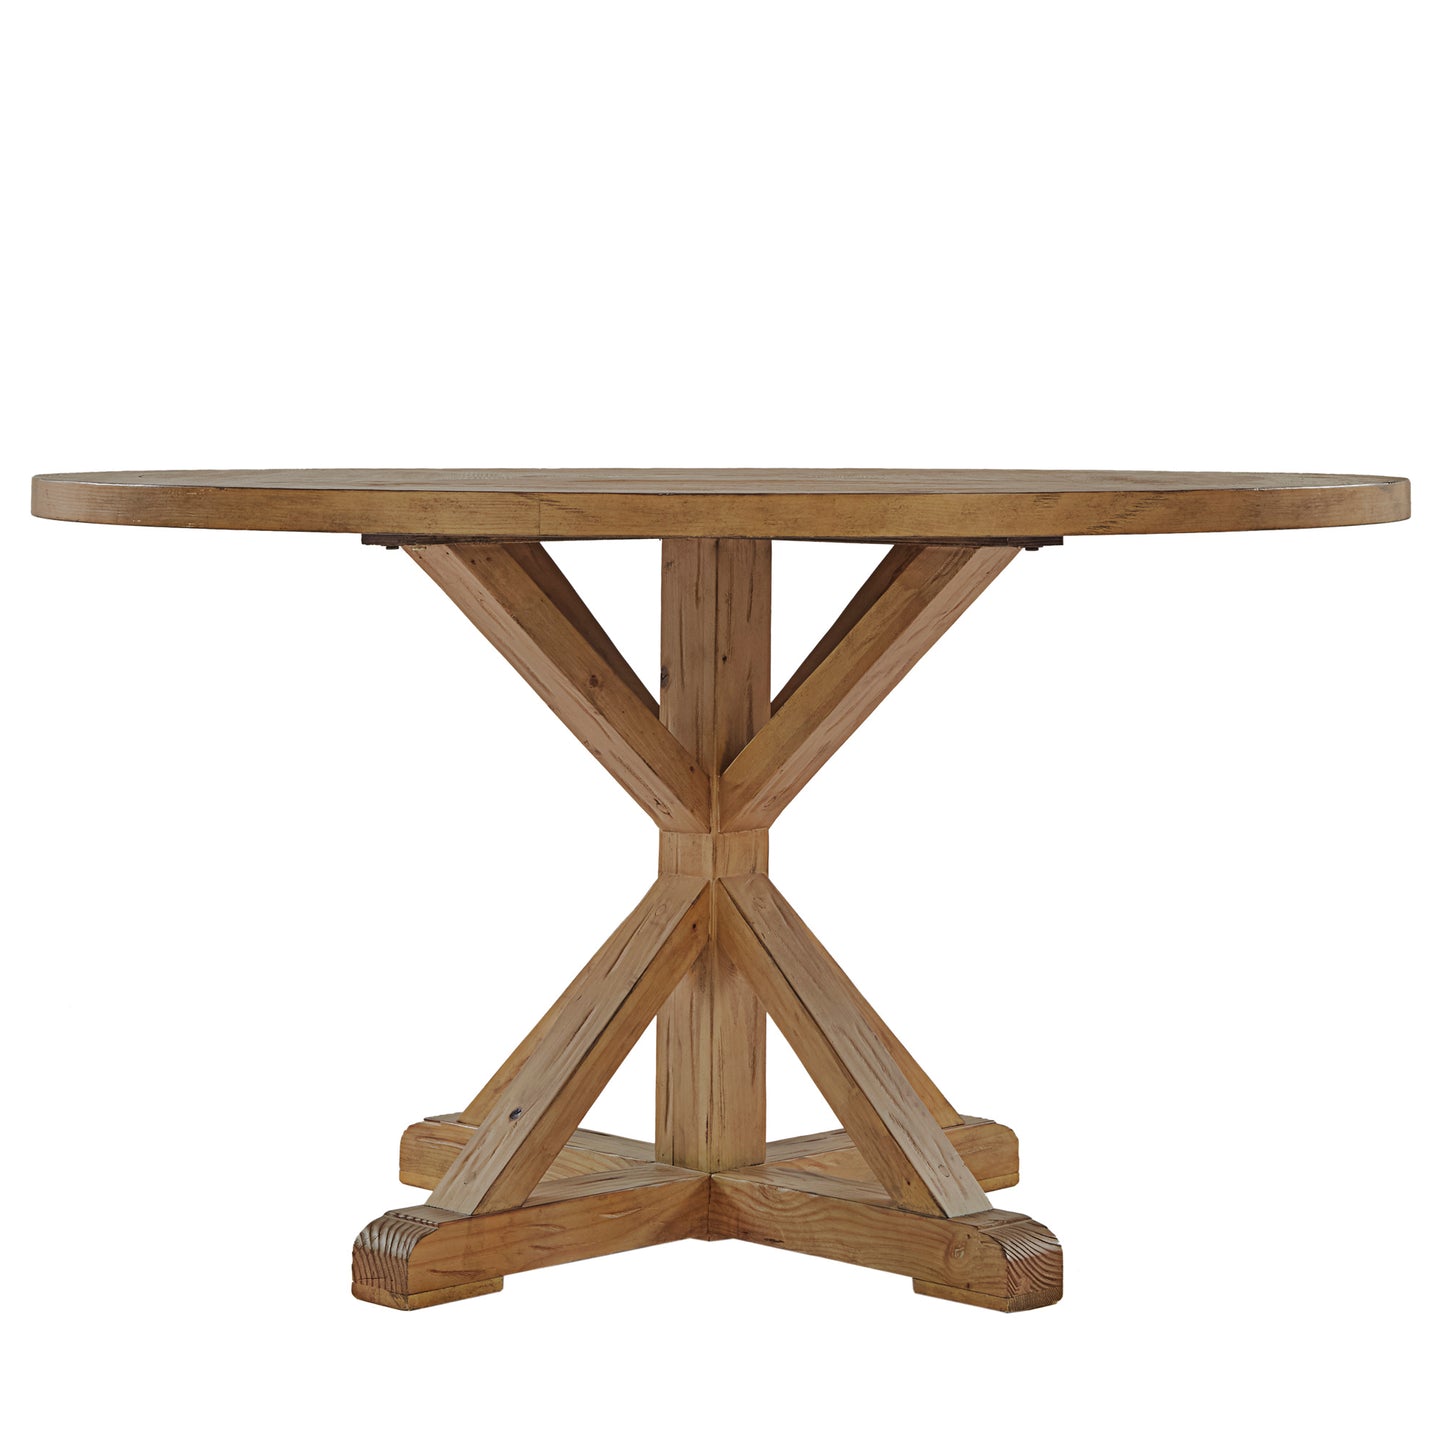 Rustic X-Base Round Pine Wood Dining Table - Pine Finish, 54-inch